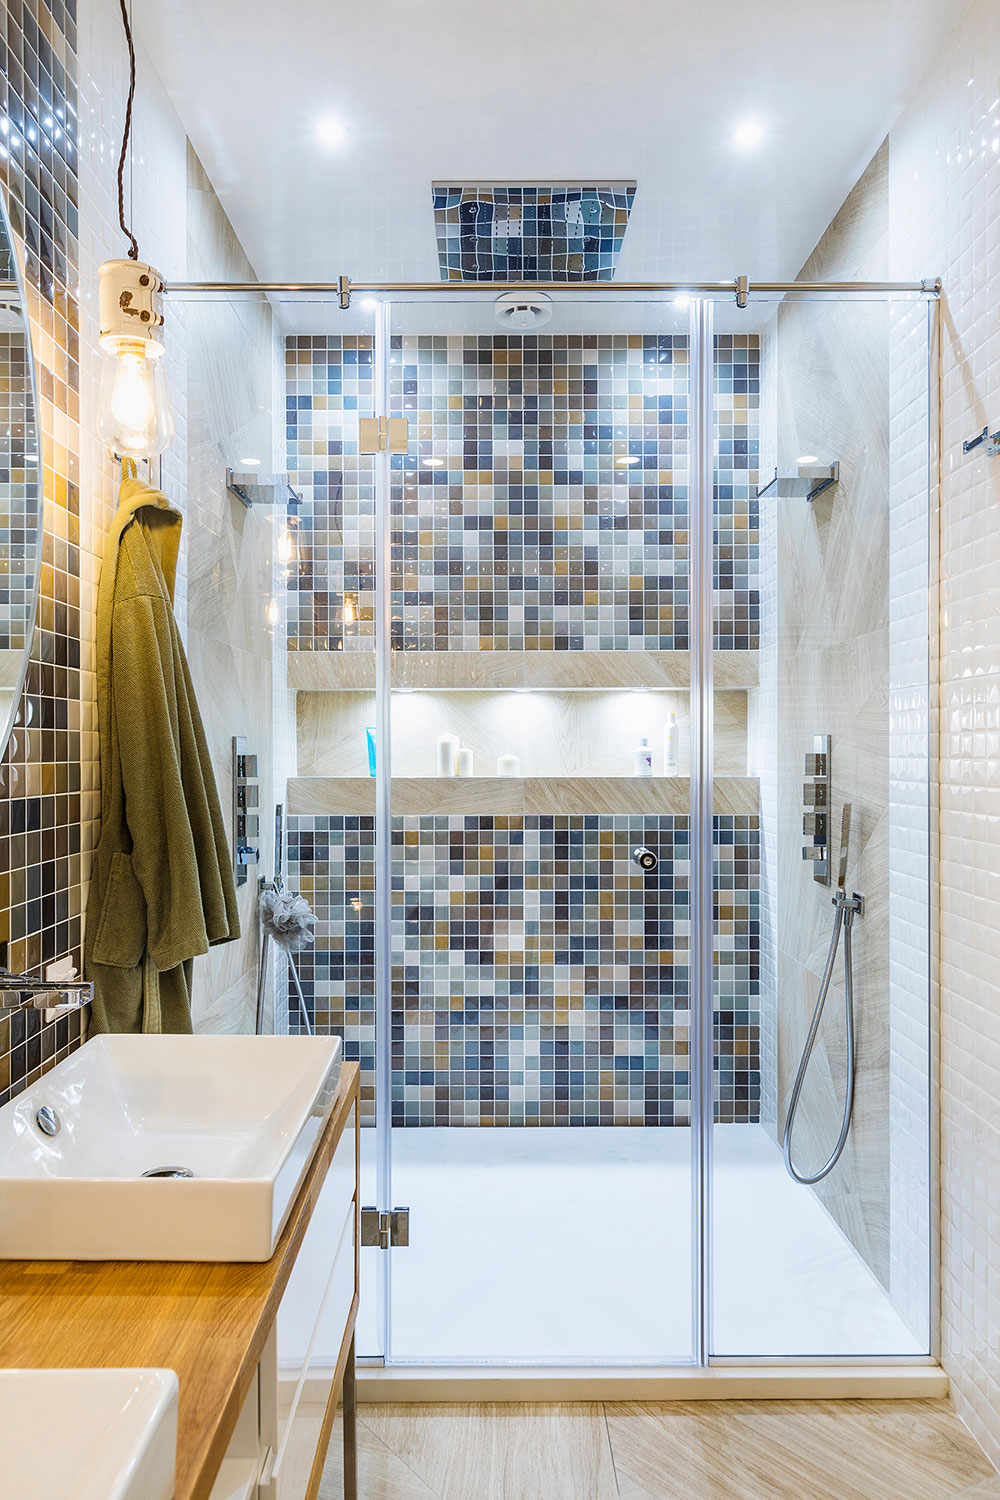 Bathroom With Colorful Tiles